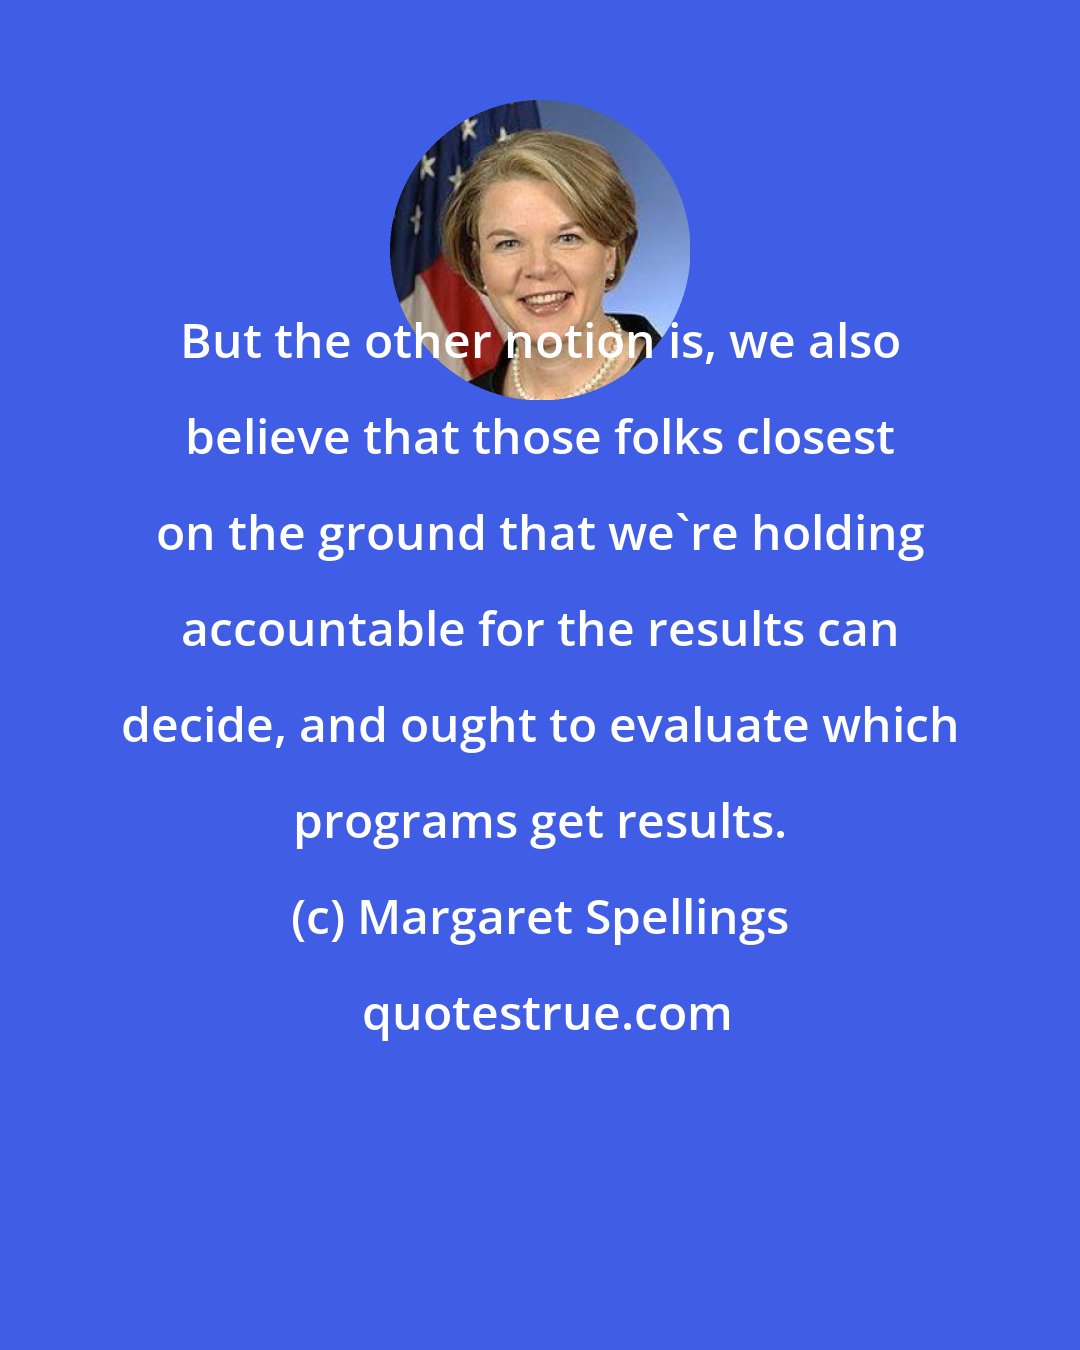 Margaret Spellings: But the other notion is, we also believe that those folks closest on the ground that we're holding accountable for the results can decide, and ought to evaluate which programs get results.